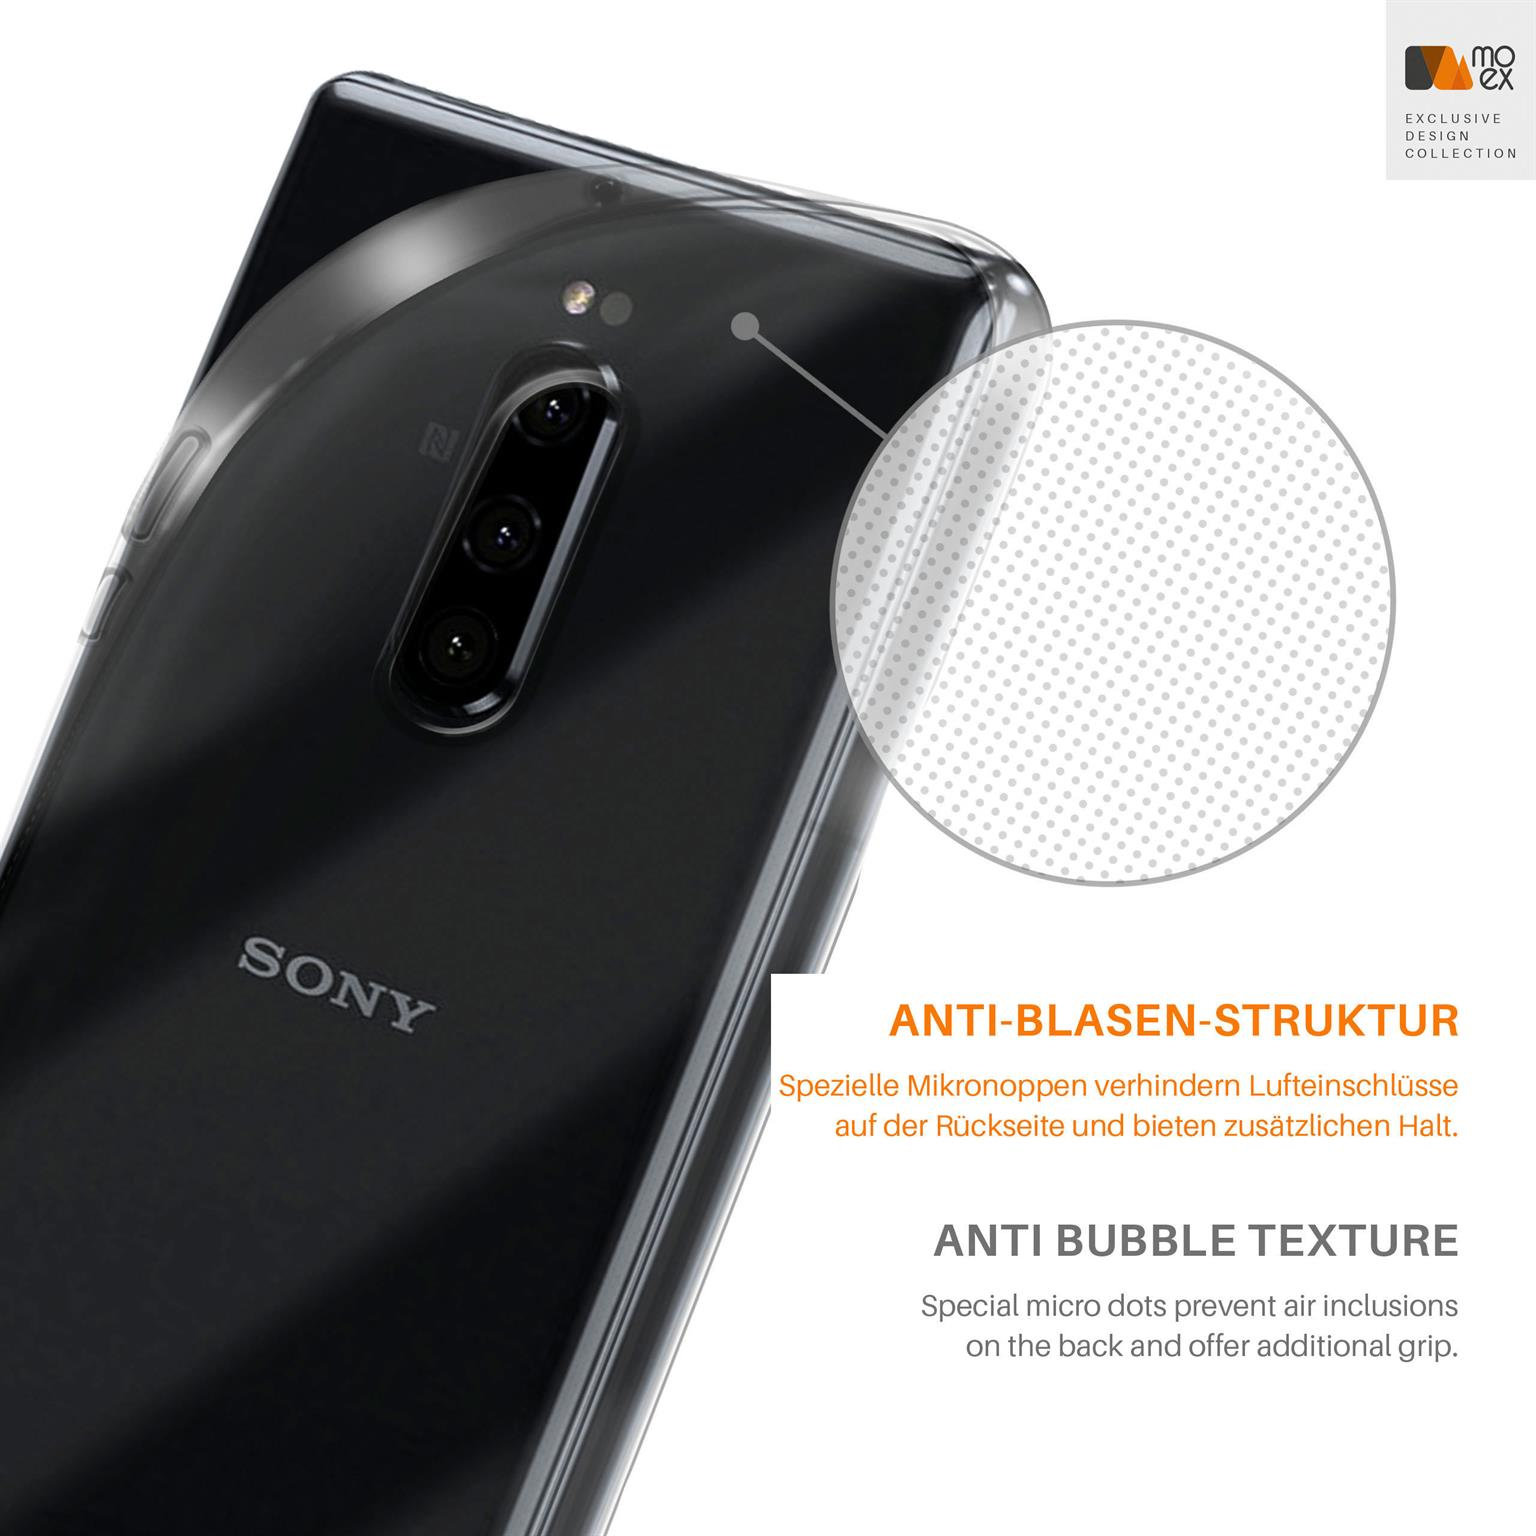 Xperia Crystal-Clear MOEX Backcover, 1, Aero Case, Sony,